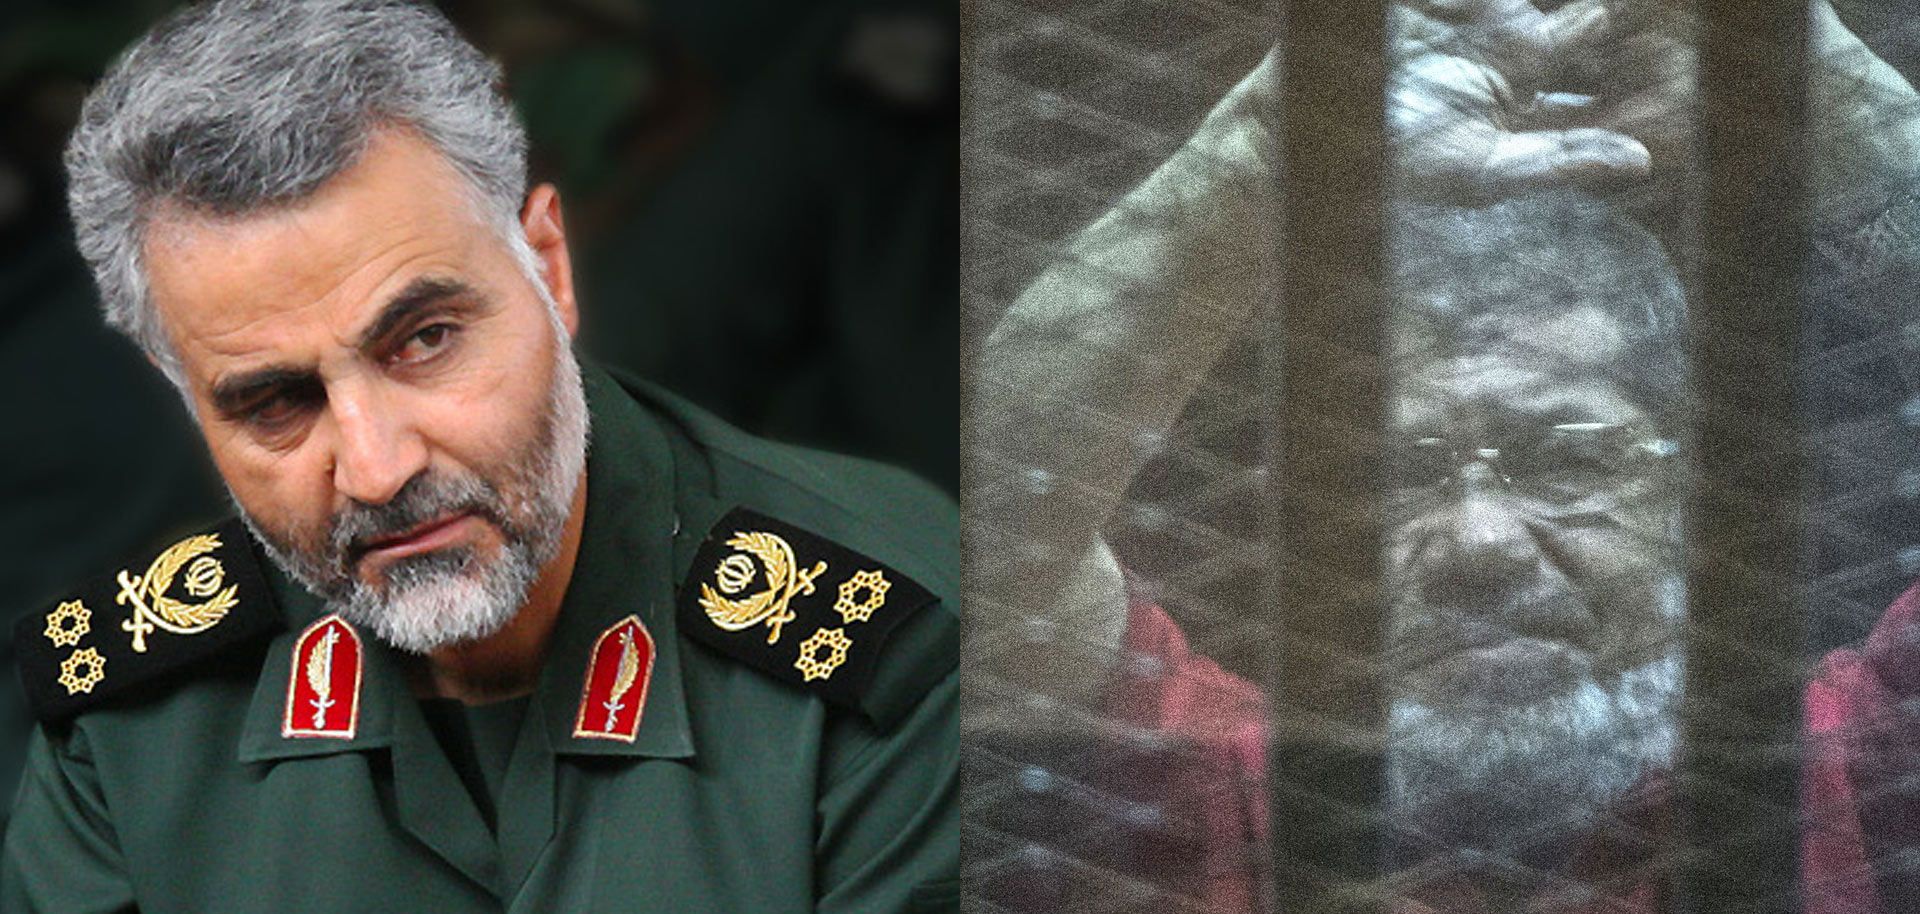 The commander of the IRGC's elite Quds Force, Qassem Soleimani (L), and ousted Egyptian President and Muslim Brotherhood member Mohammed Morsi. The United States is considering placing both organizations on its list of foreign terrorist organizations.